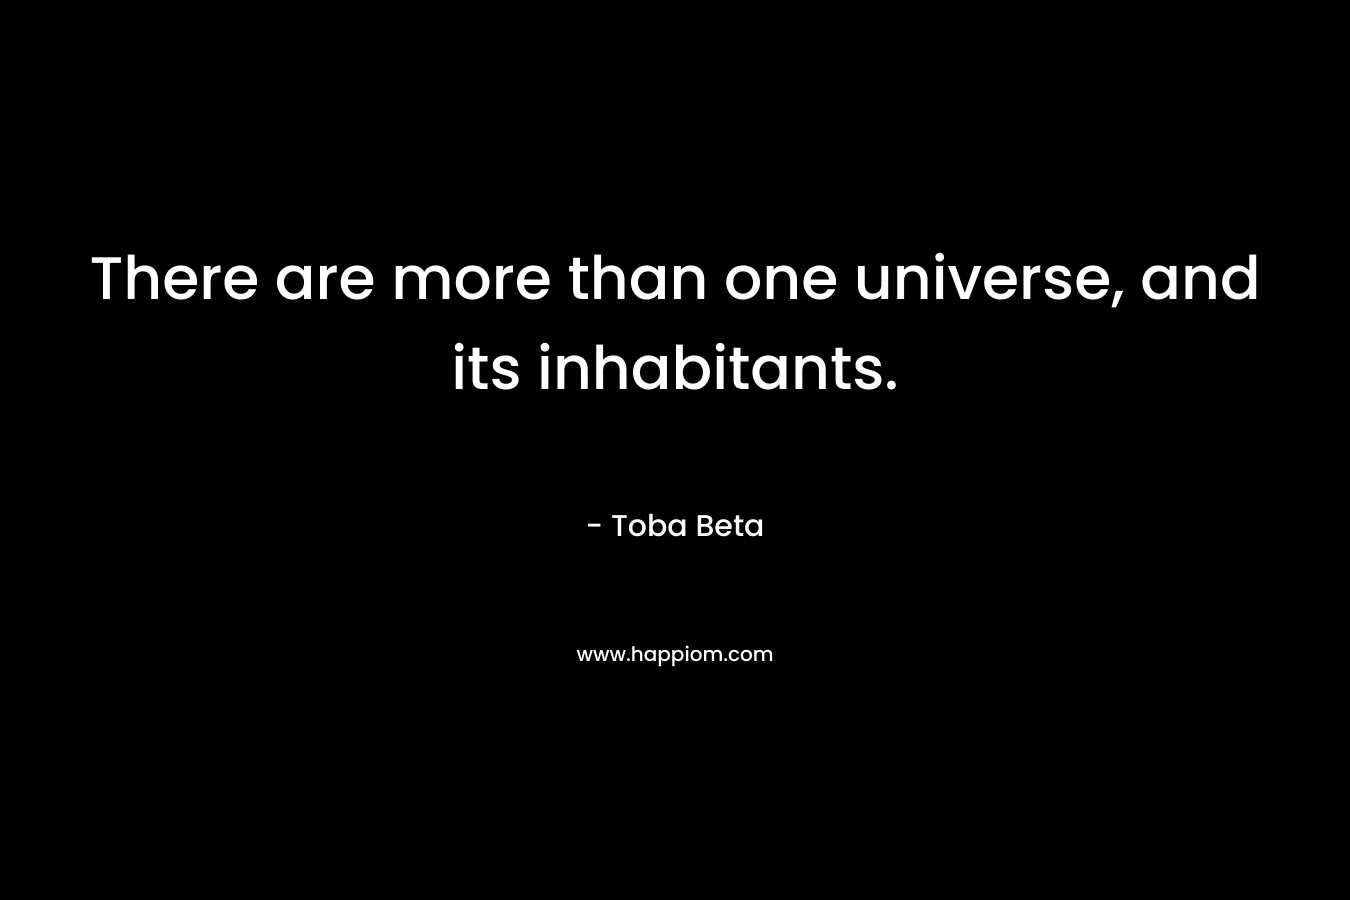 There are more than one universe, and its inhabitants. – Toba Beta